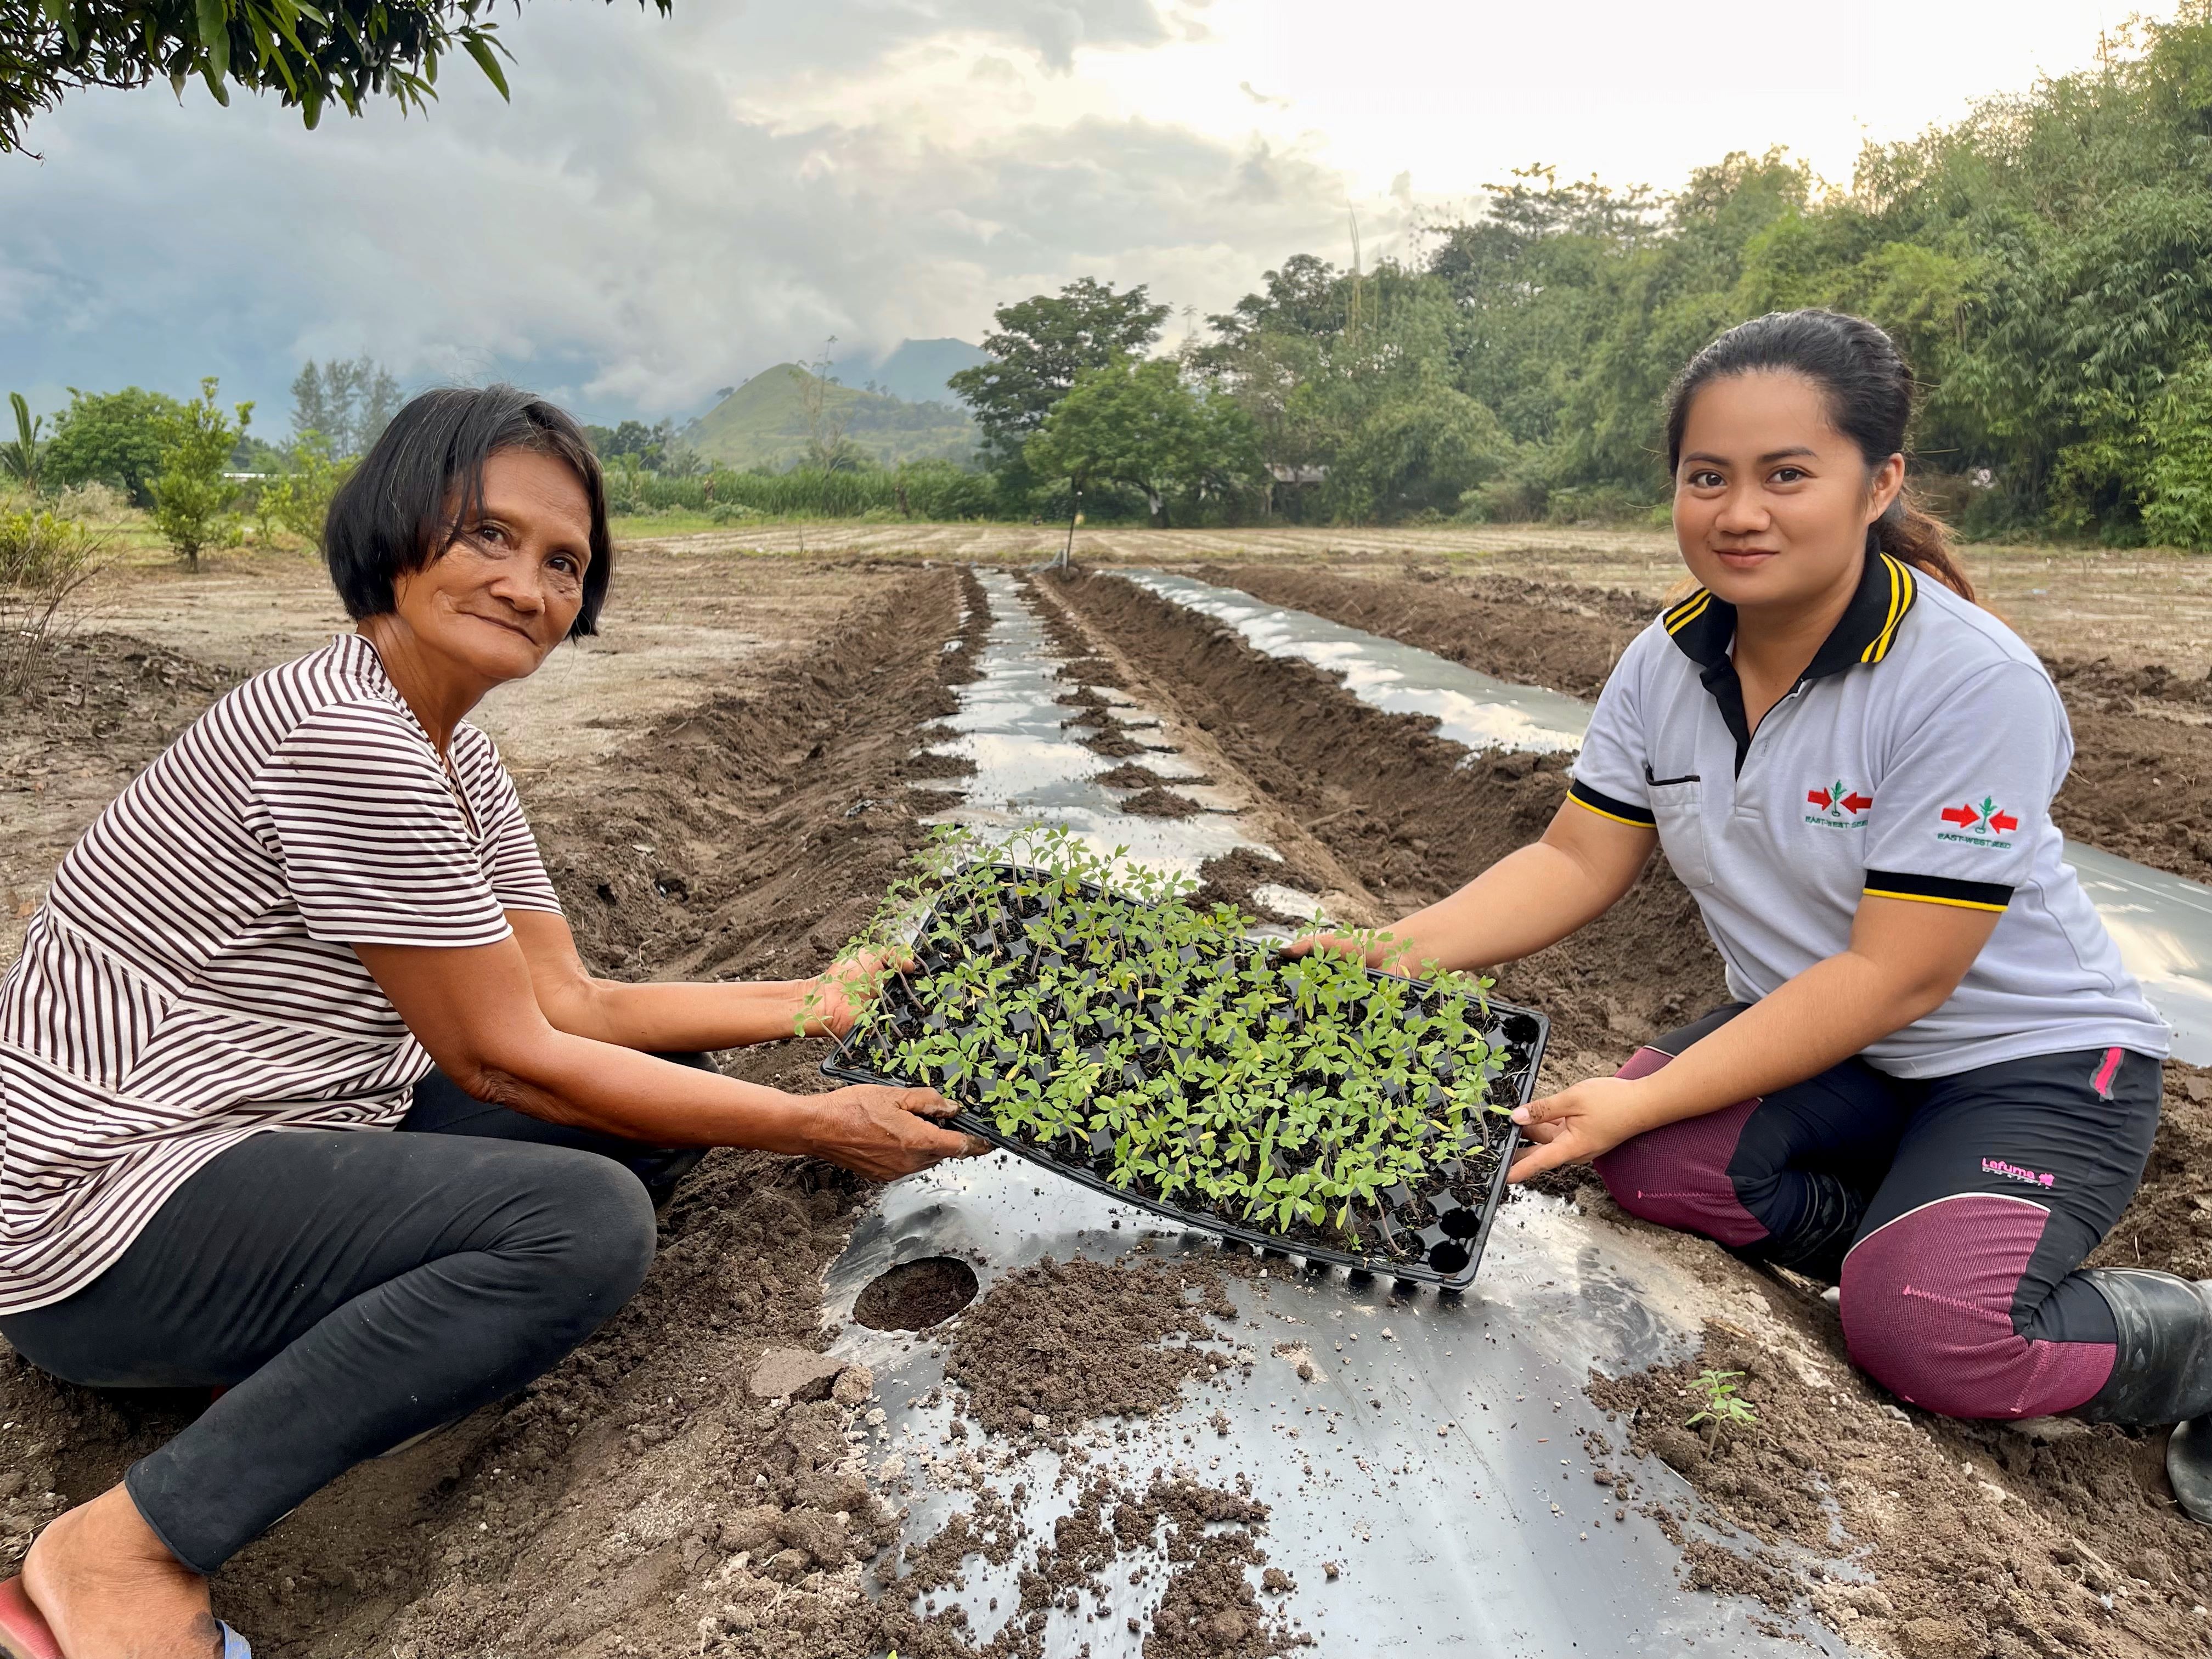 Female farmer and female trainer hold a tray of seedlings over a prepared raised bed